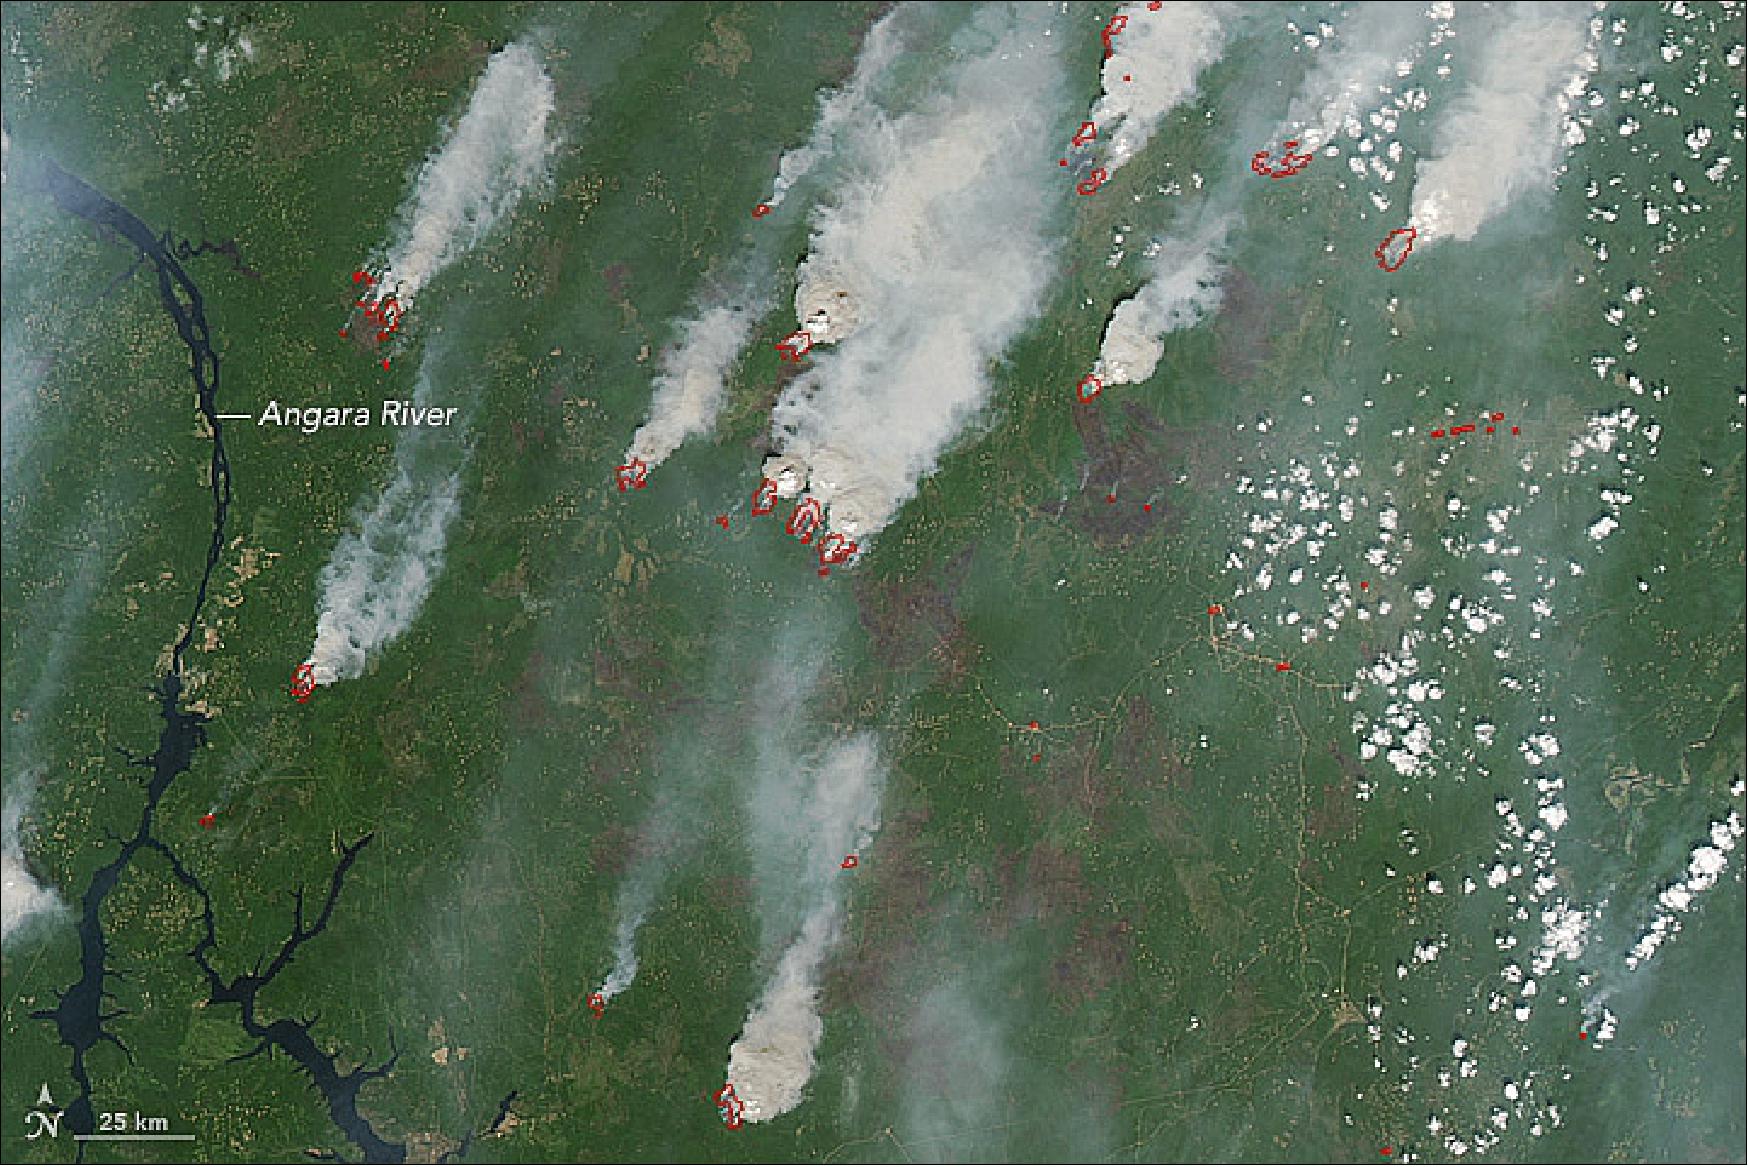 Figure 101: MODIS detail image of fires near Lake Baikal and the Angara River (image credit: NASA Earth observatory, image by Jeff Schmaltz, story by Mike Carlowicz)